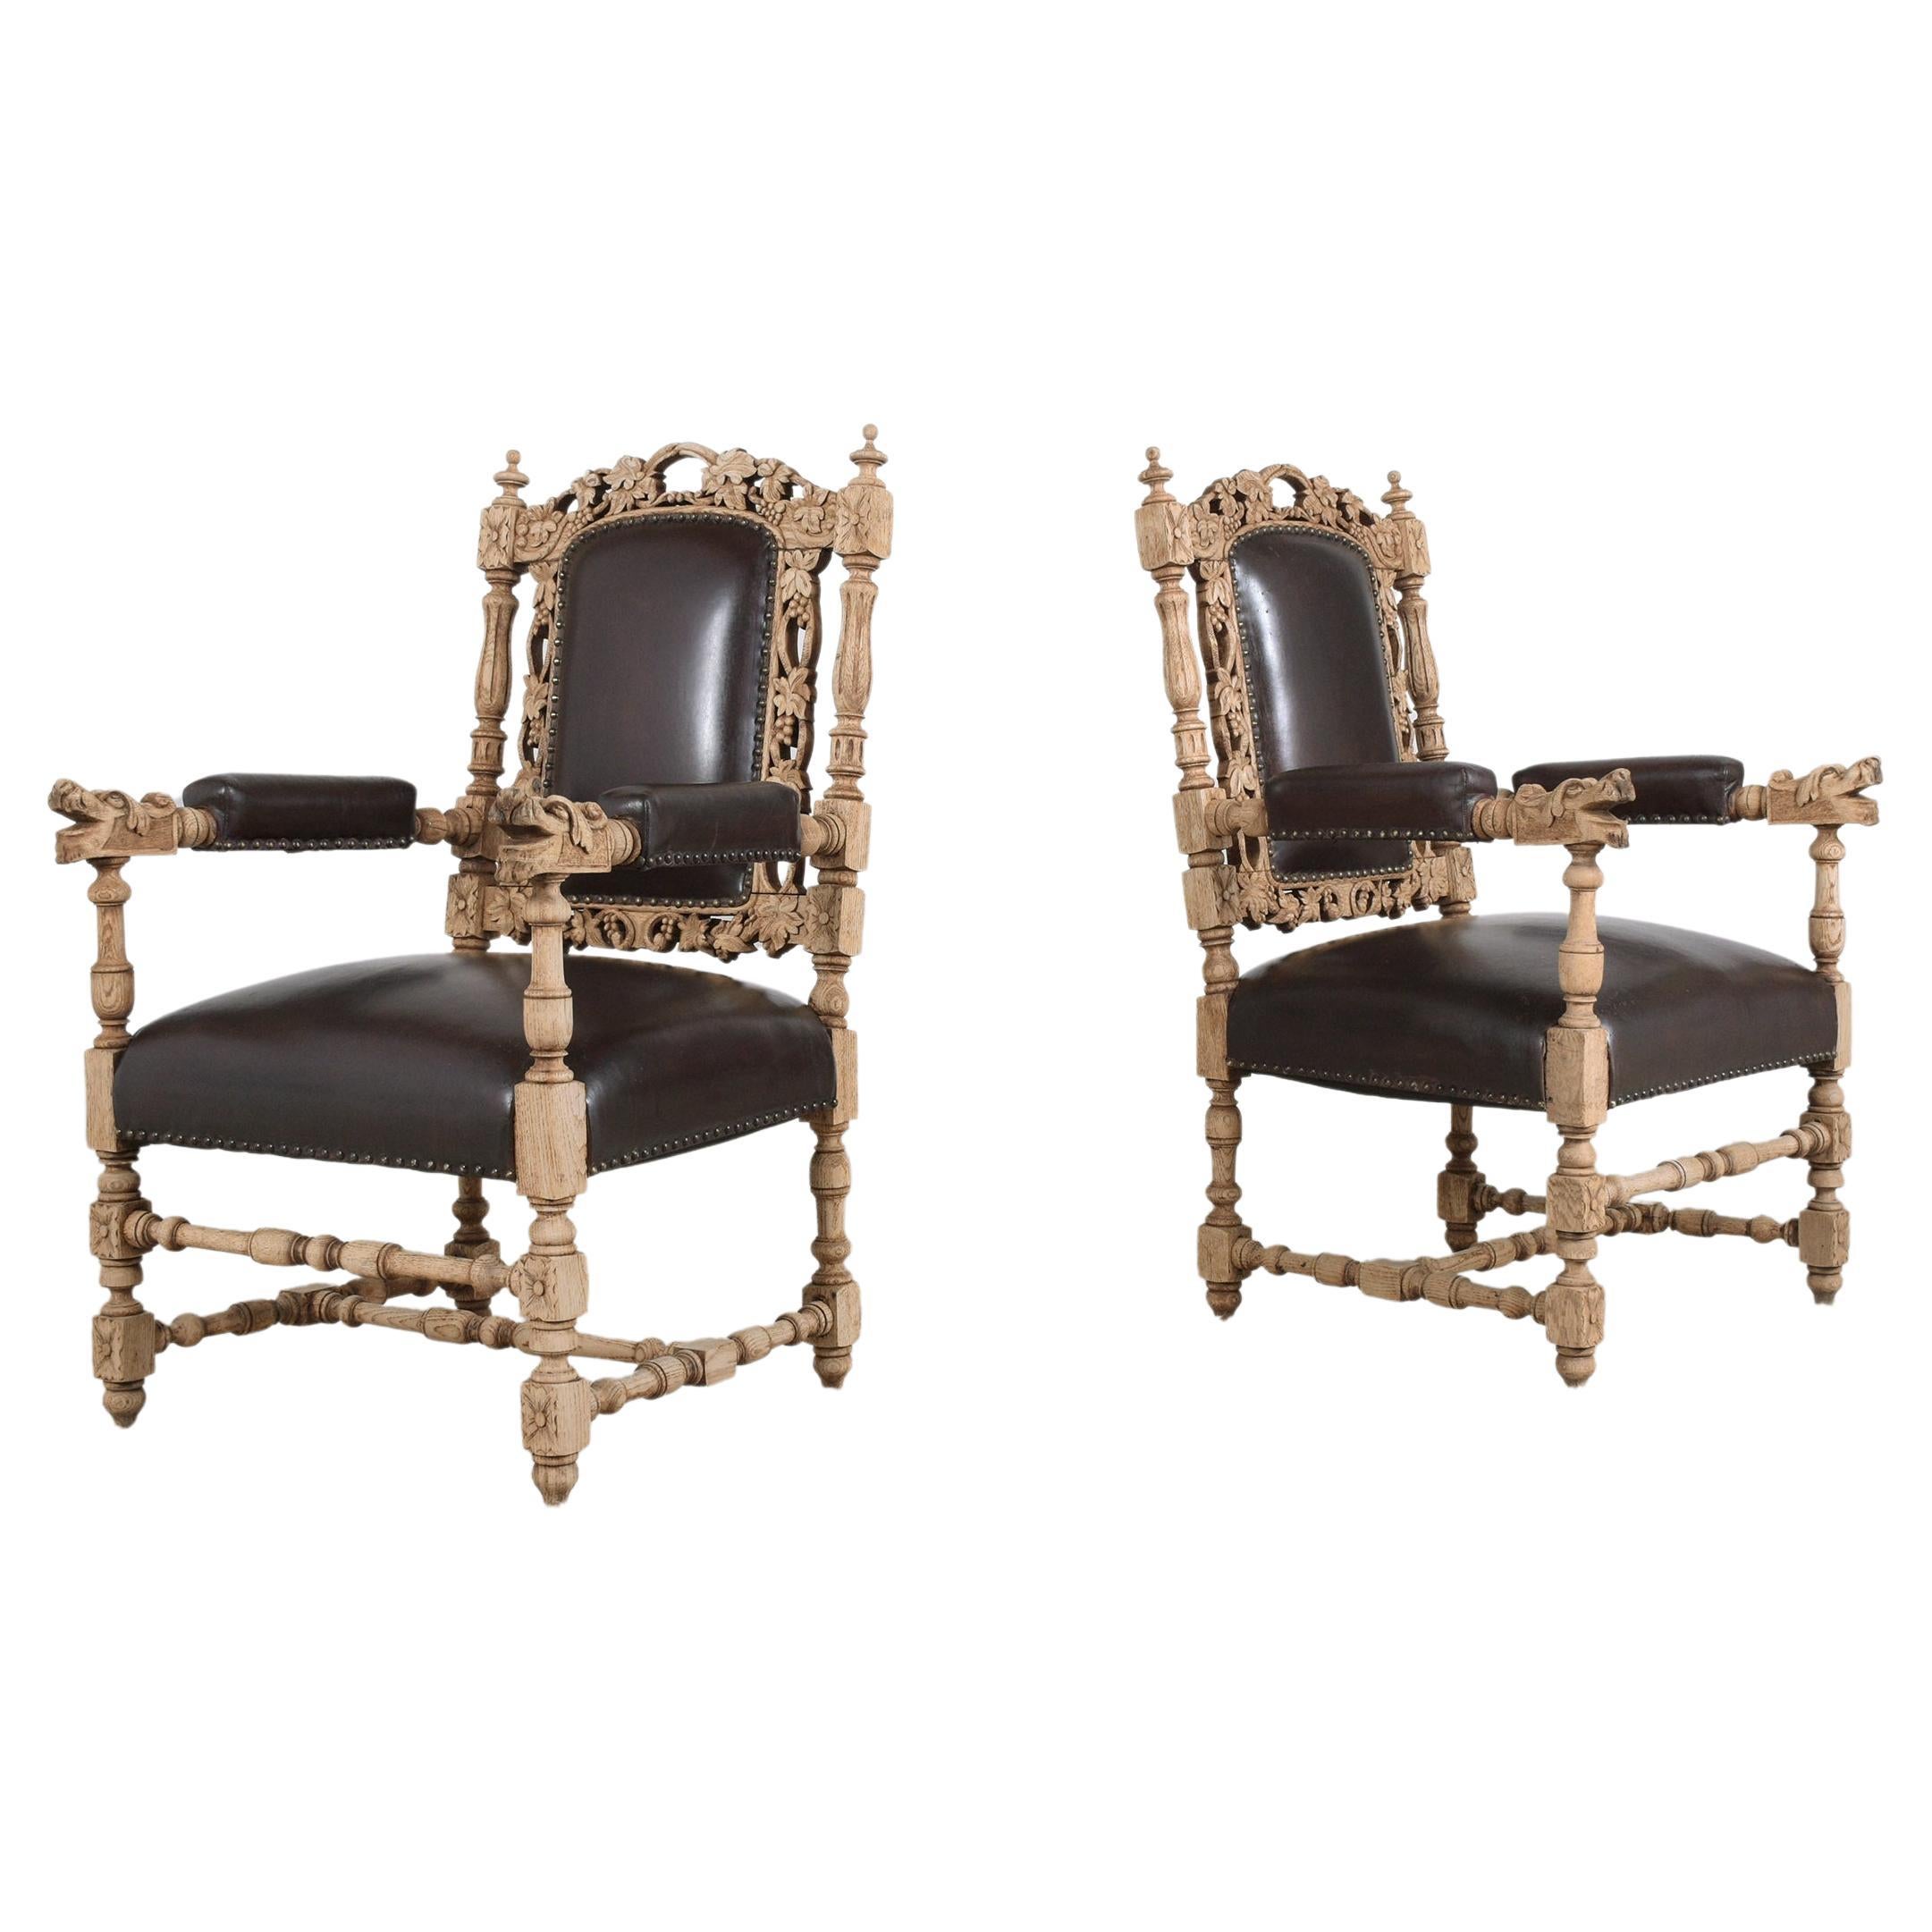 Pair of Antique French Carved Leather Armchairs